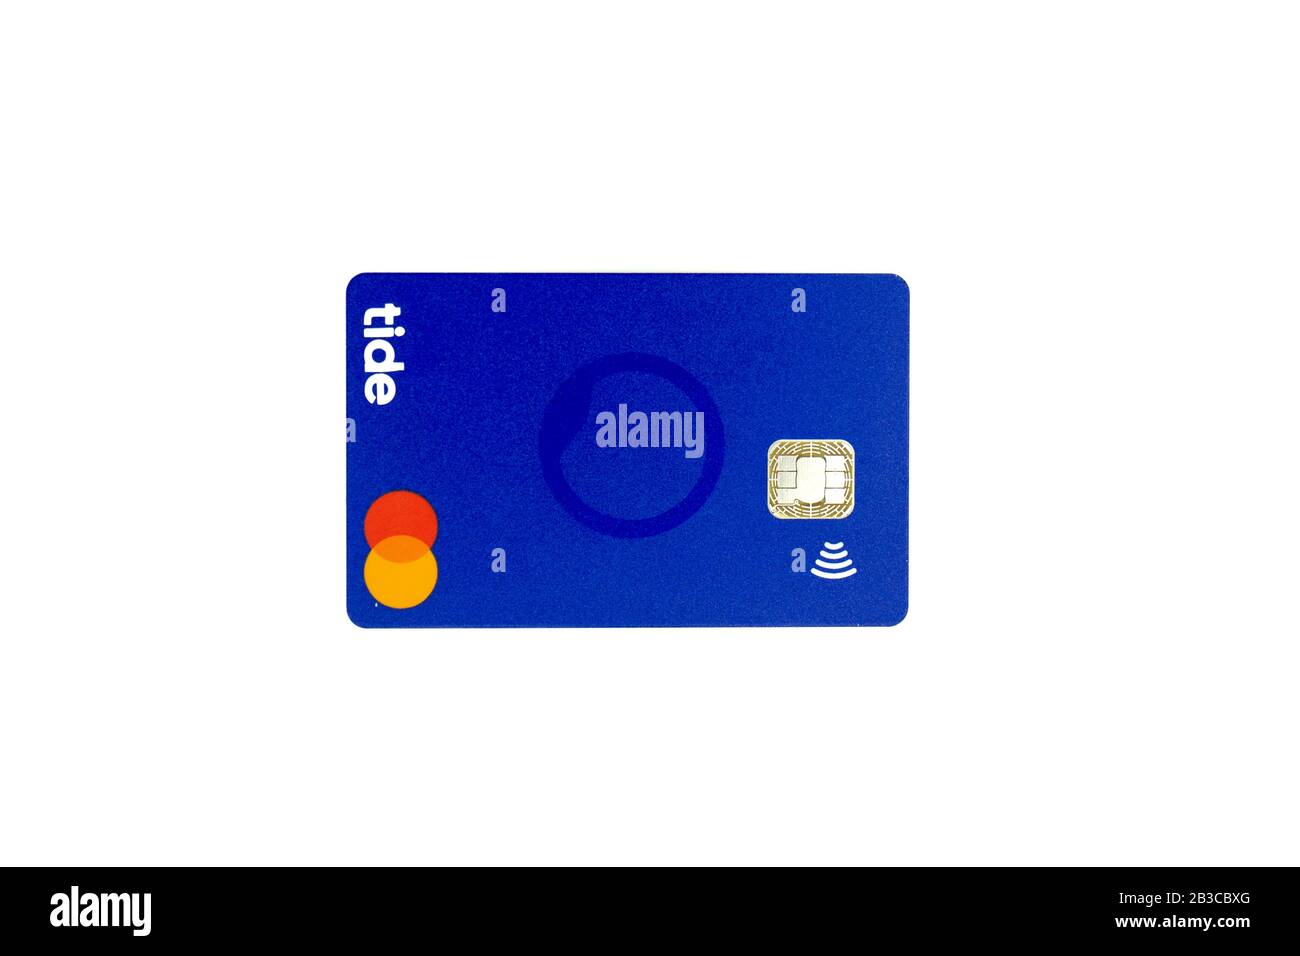 A Tide bank Debit card Mastercard isolated on a white background Stock Photo